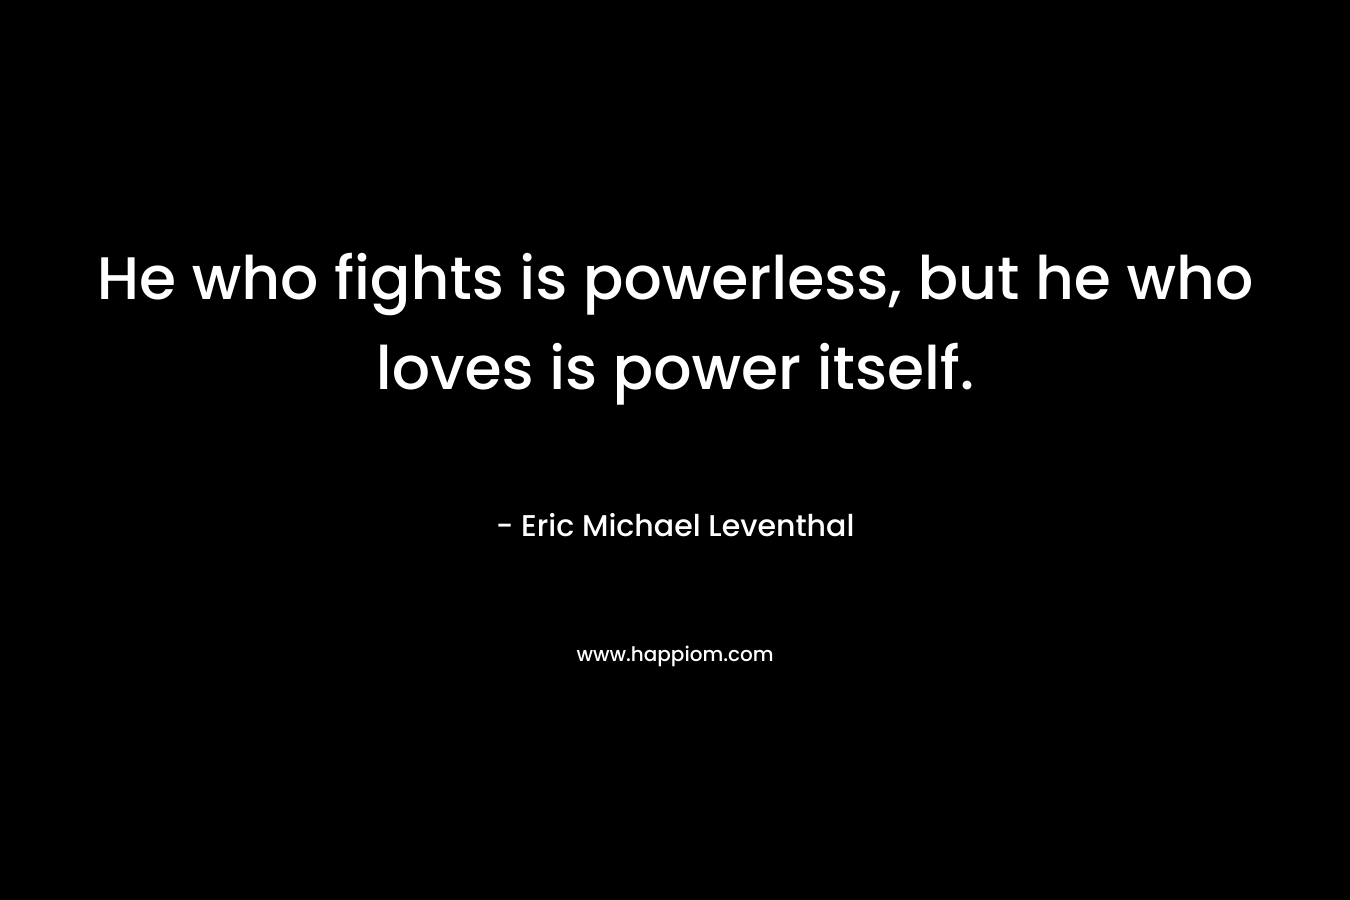 He who fights is powerless, but he who loves is power itself.